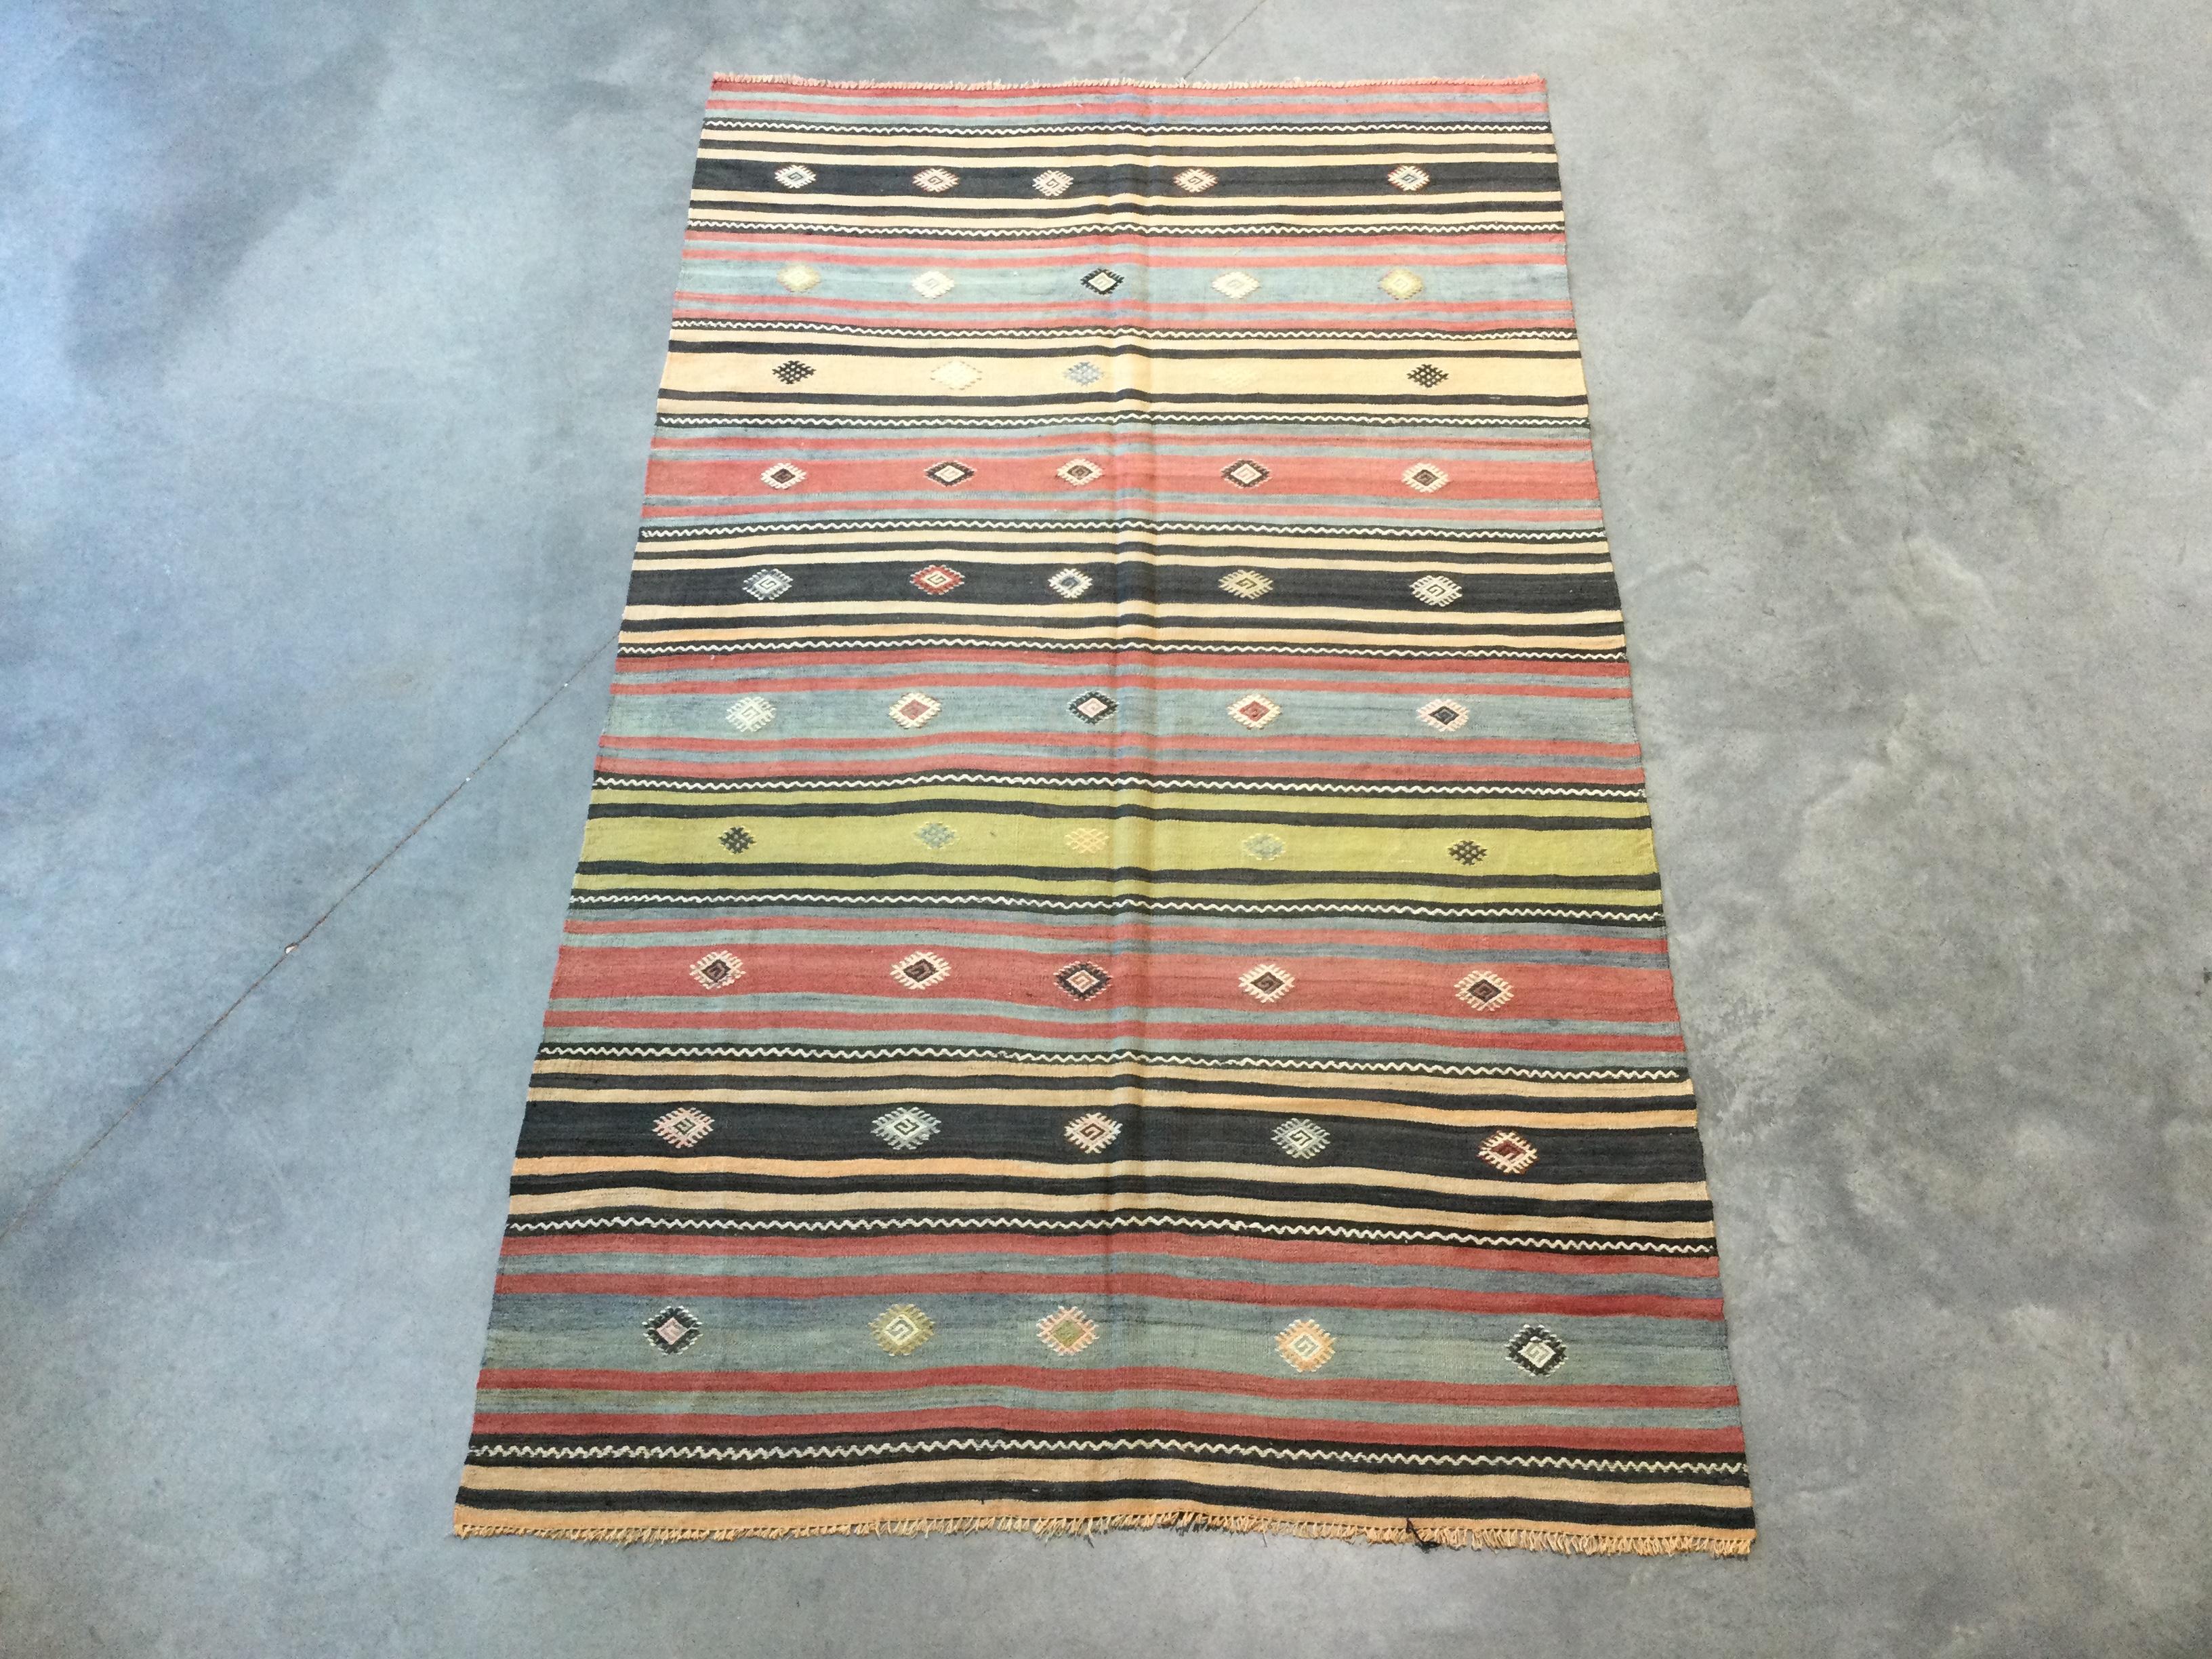 - Classic Kilim made of wool.
- His style is characterized by its geometric designs .
- Their tones are not uniform, which makes these types of rugs very functional when decorating with other fabrics.
- Its flat texture mixes different geometries